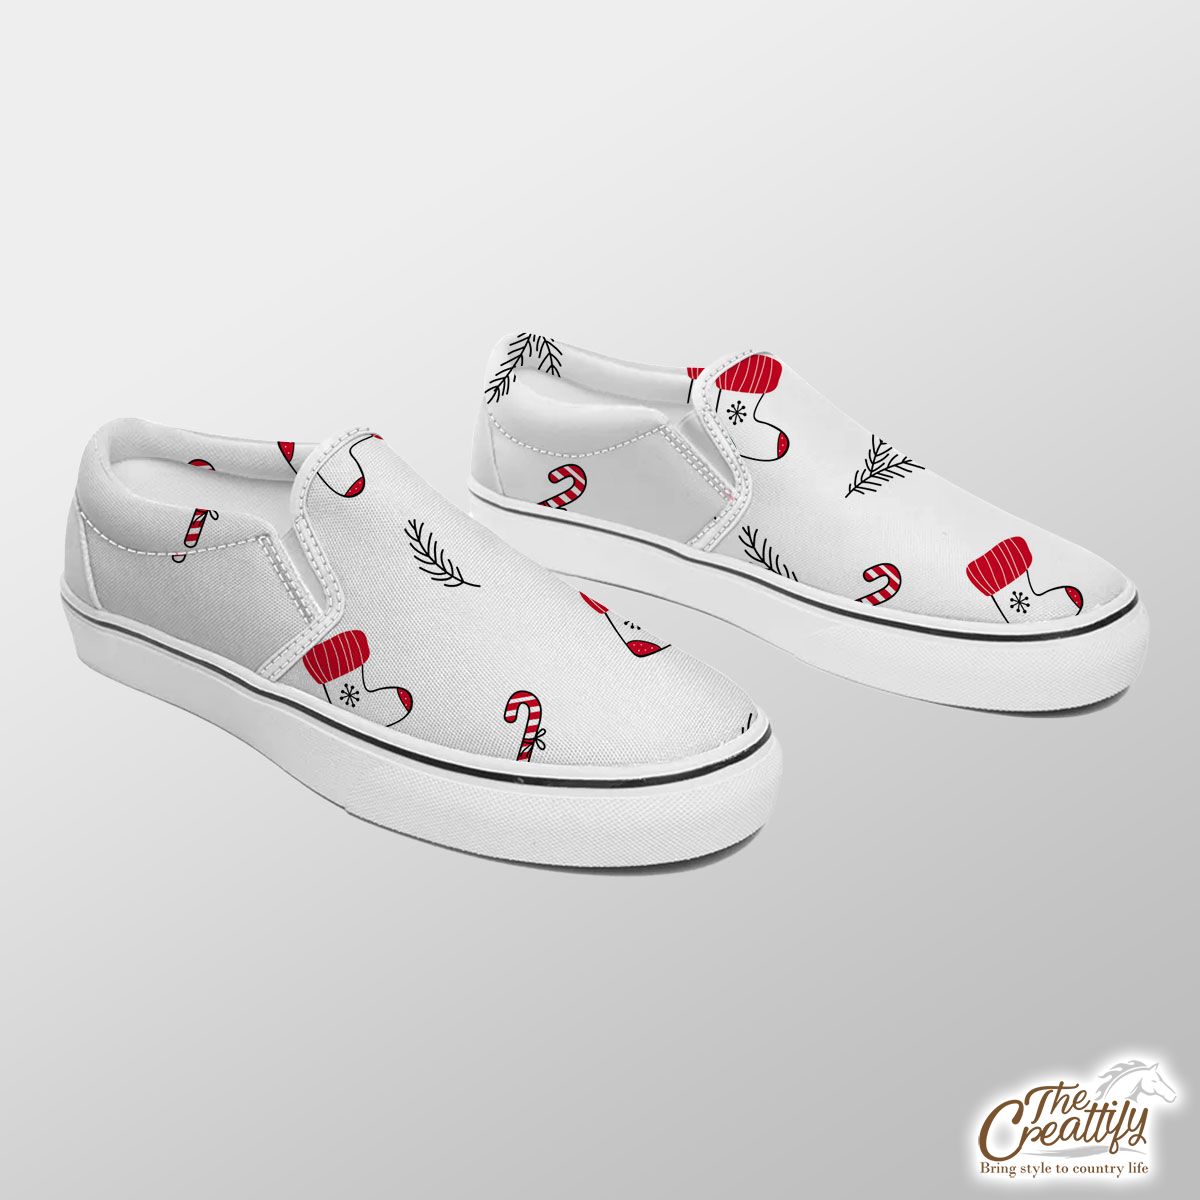 Hand Drawn Red Socks, Christmas Tree Branch And Candy Canes White Pattern Slip On Sneakers